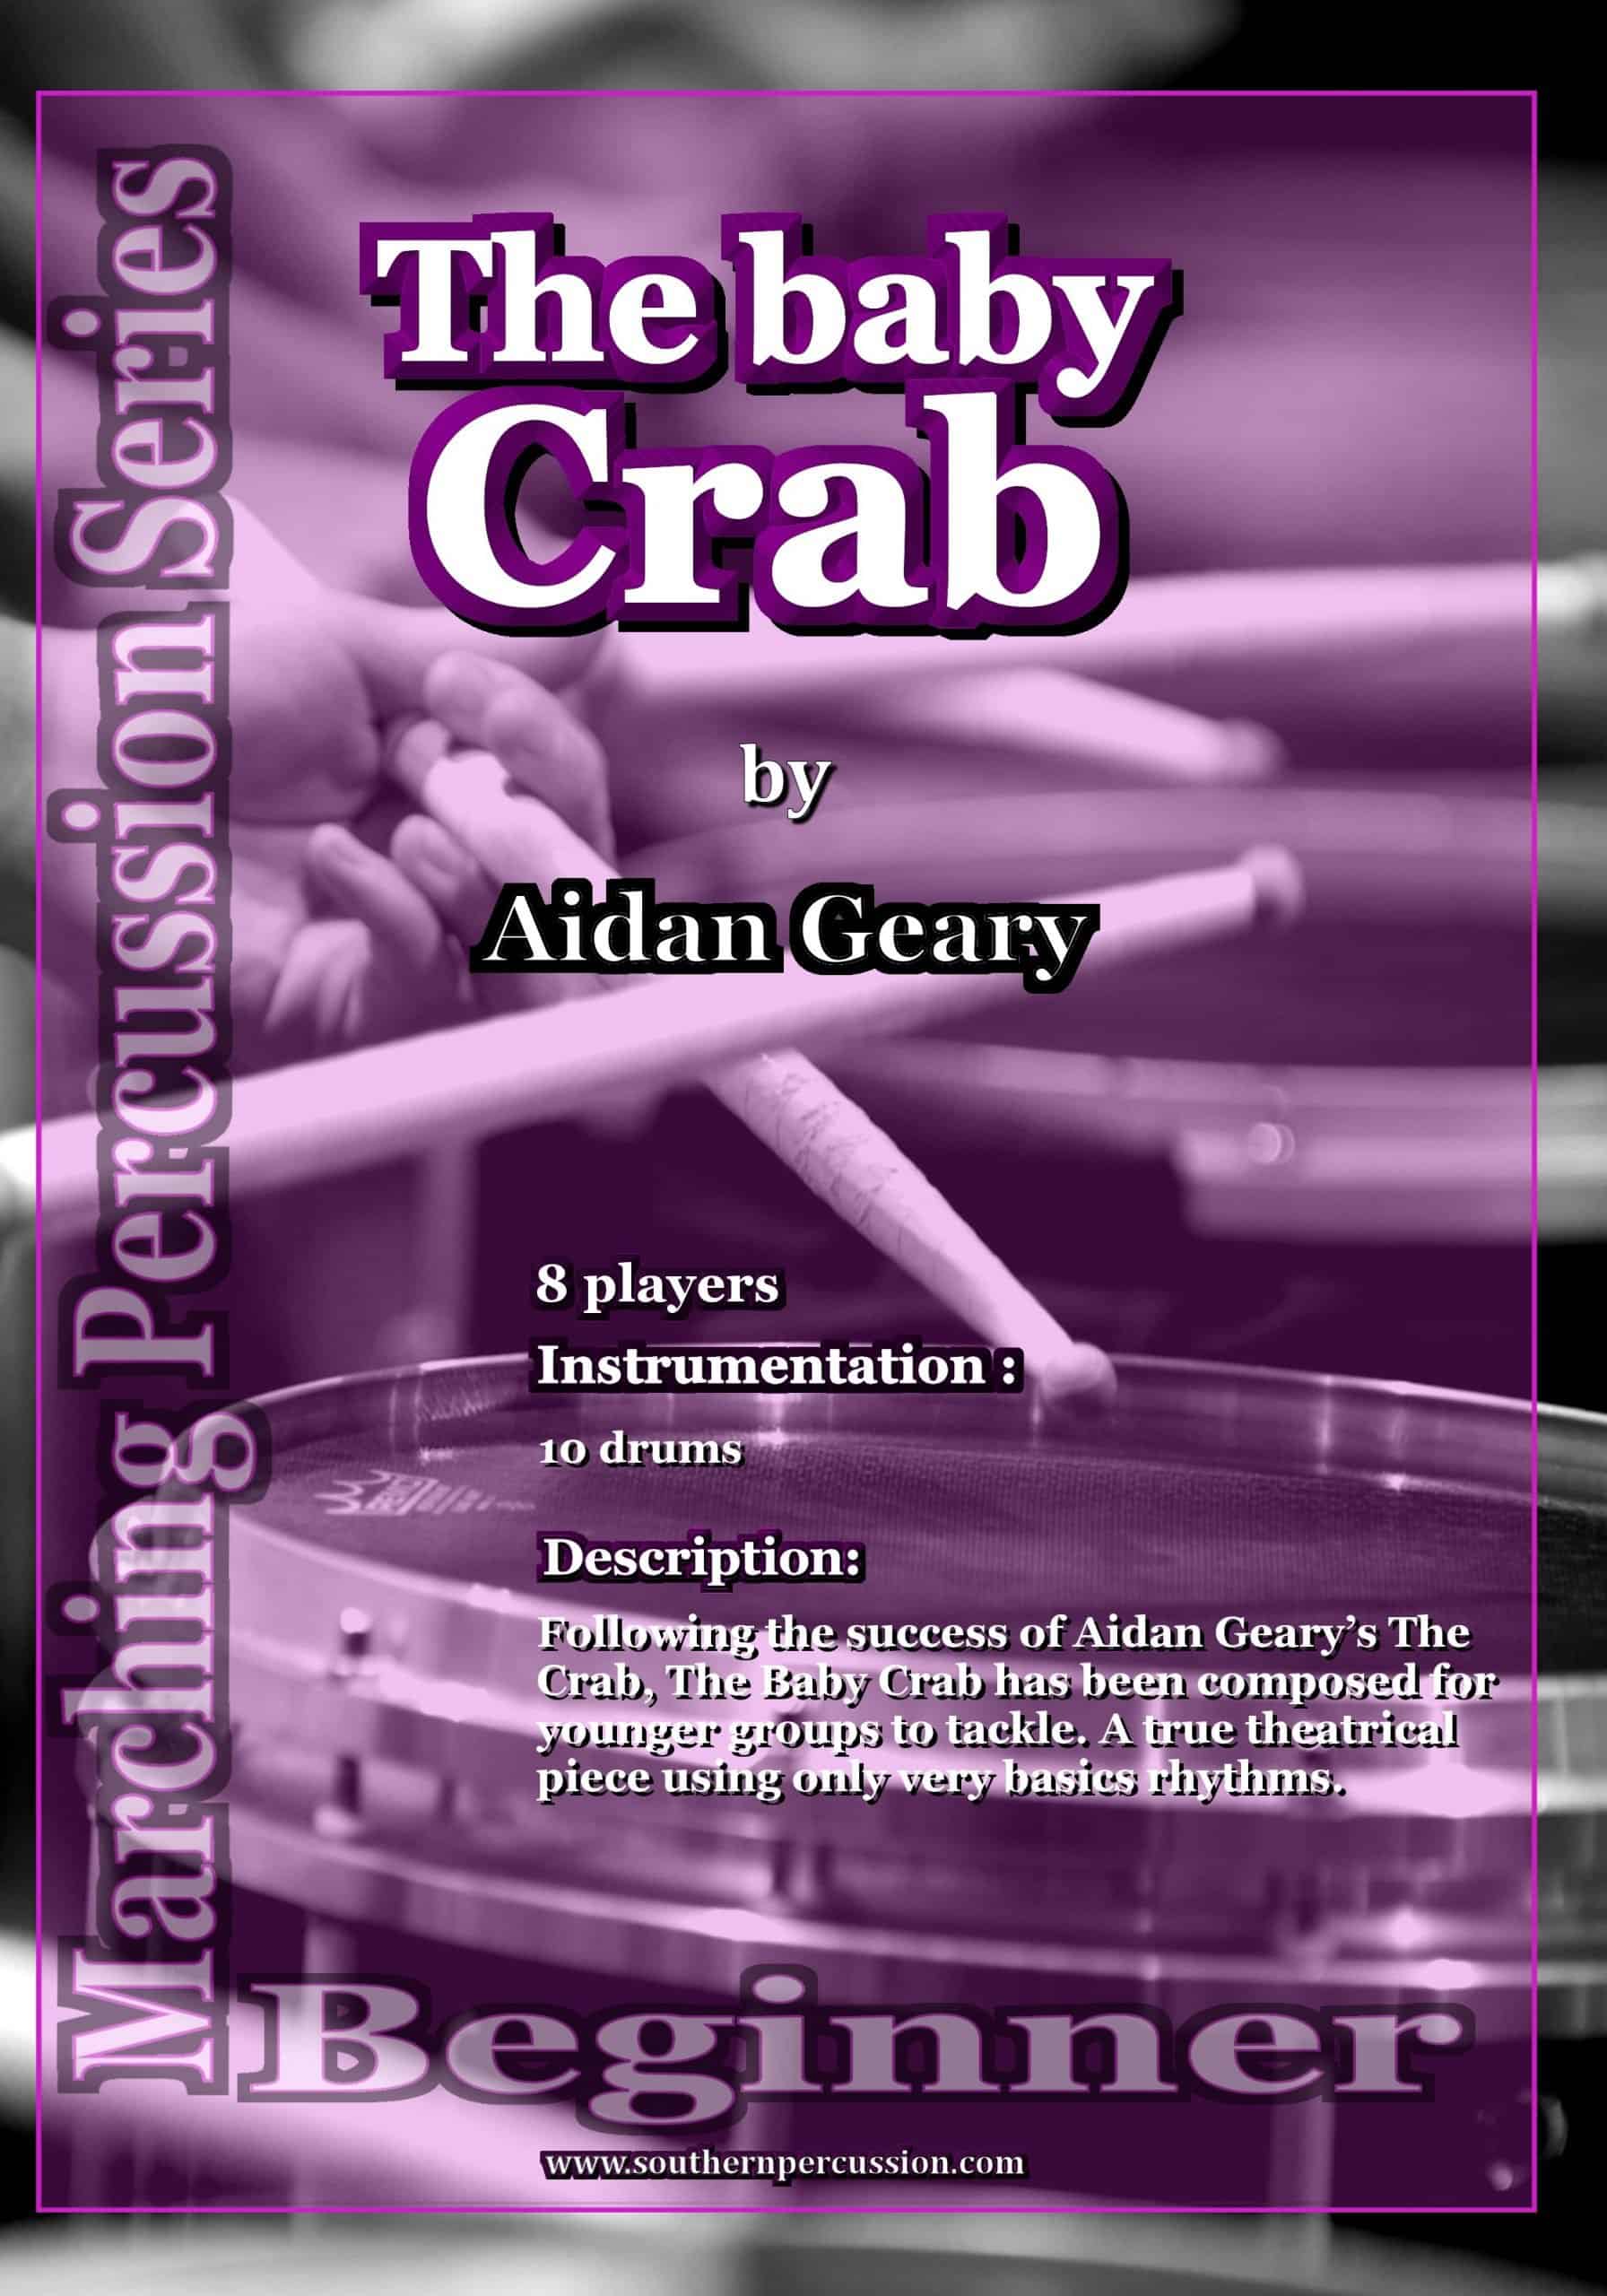 The Baby Crab by Aidan Geary